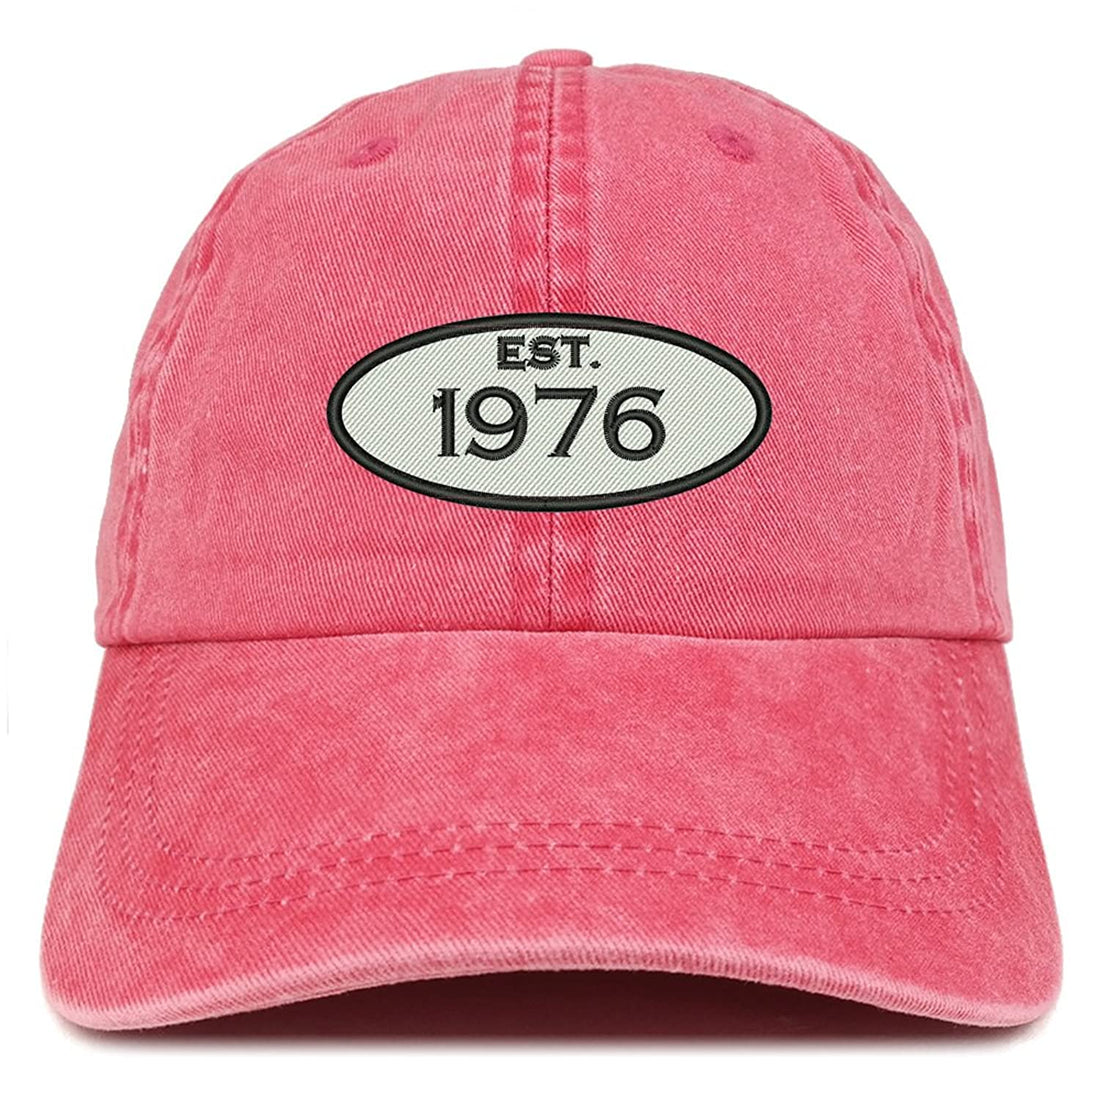 Trendy Apparel Shop Established 1976 Embroidered 42nd Birthday Gift Pigment Dyed Washed Cotton Cap - Red